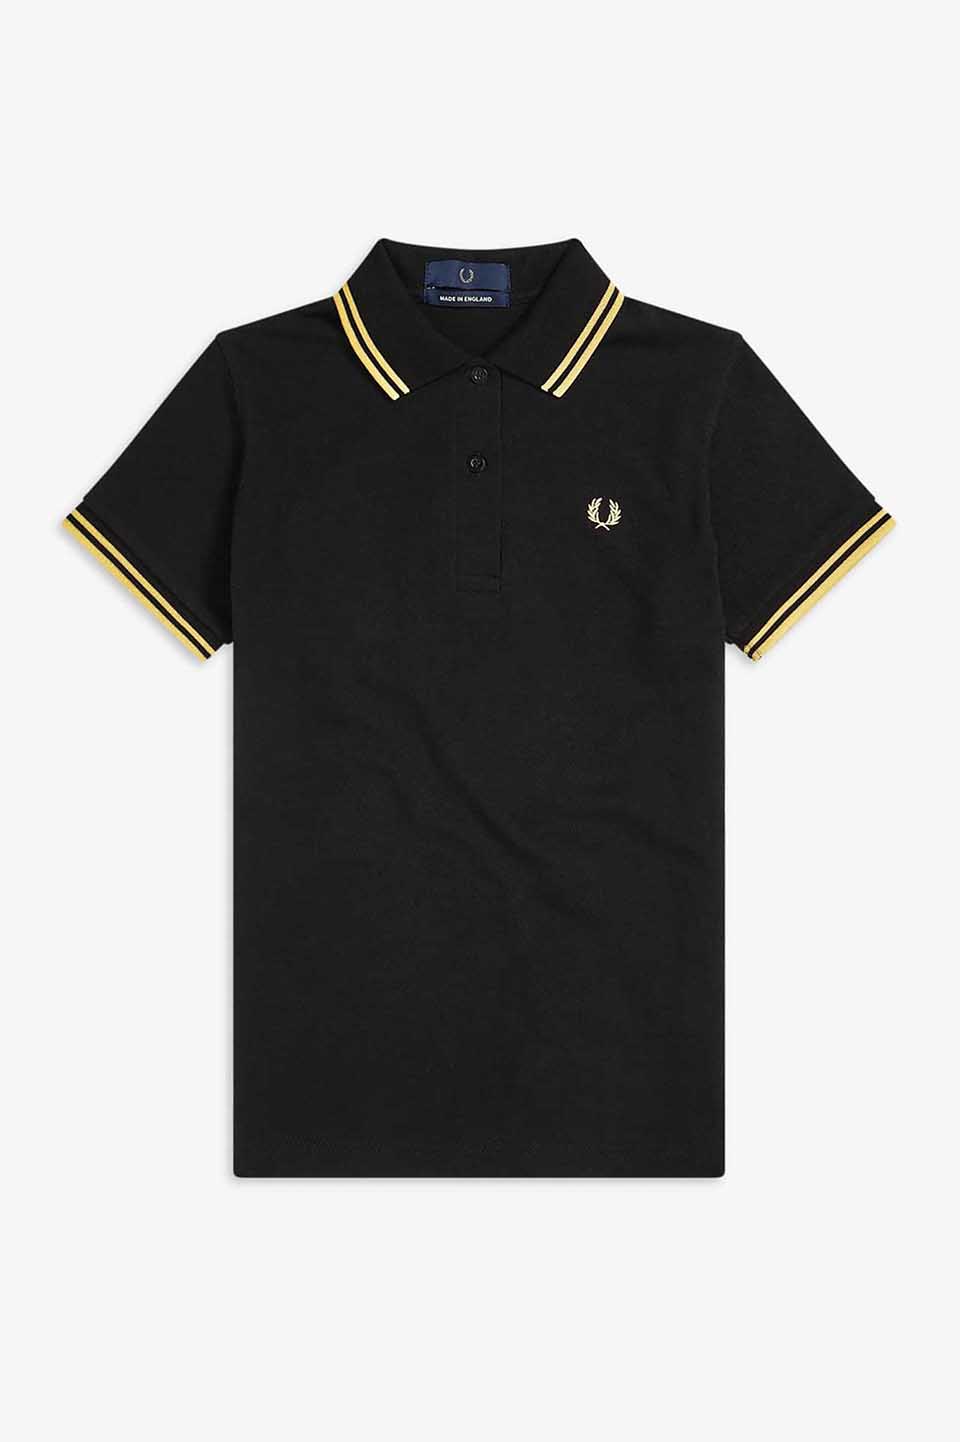 The Fred Perry Shirt - G12(8 157：BLACK / CHAMP / CHAMP): | FRED 